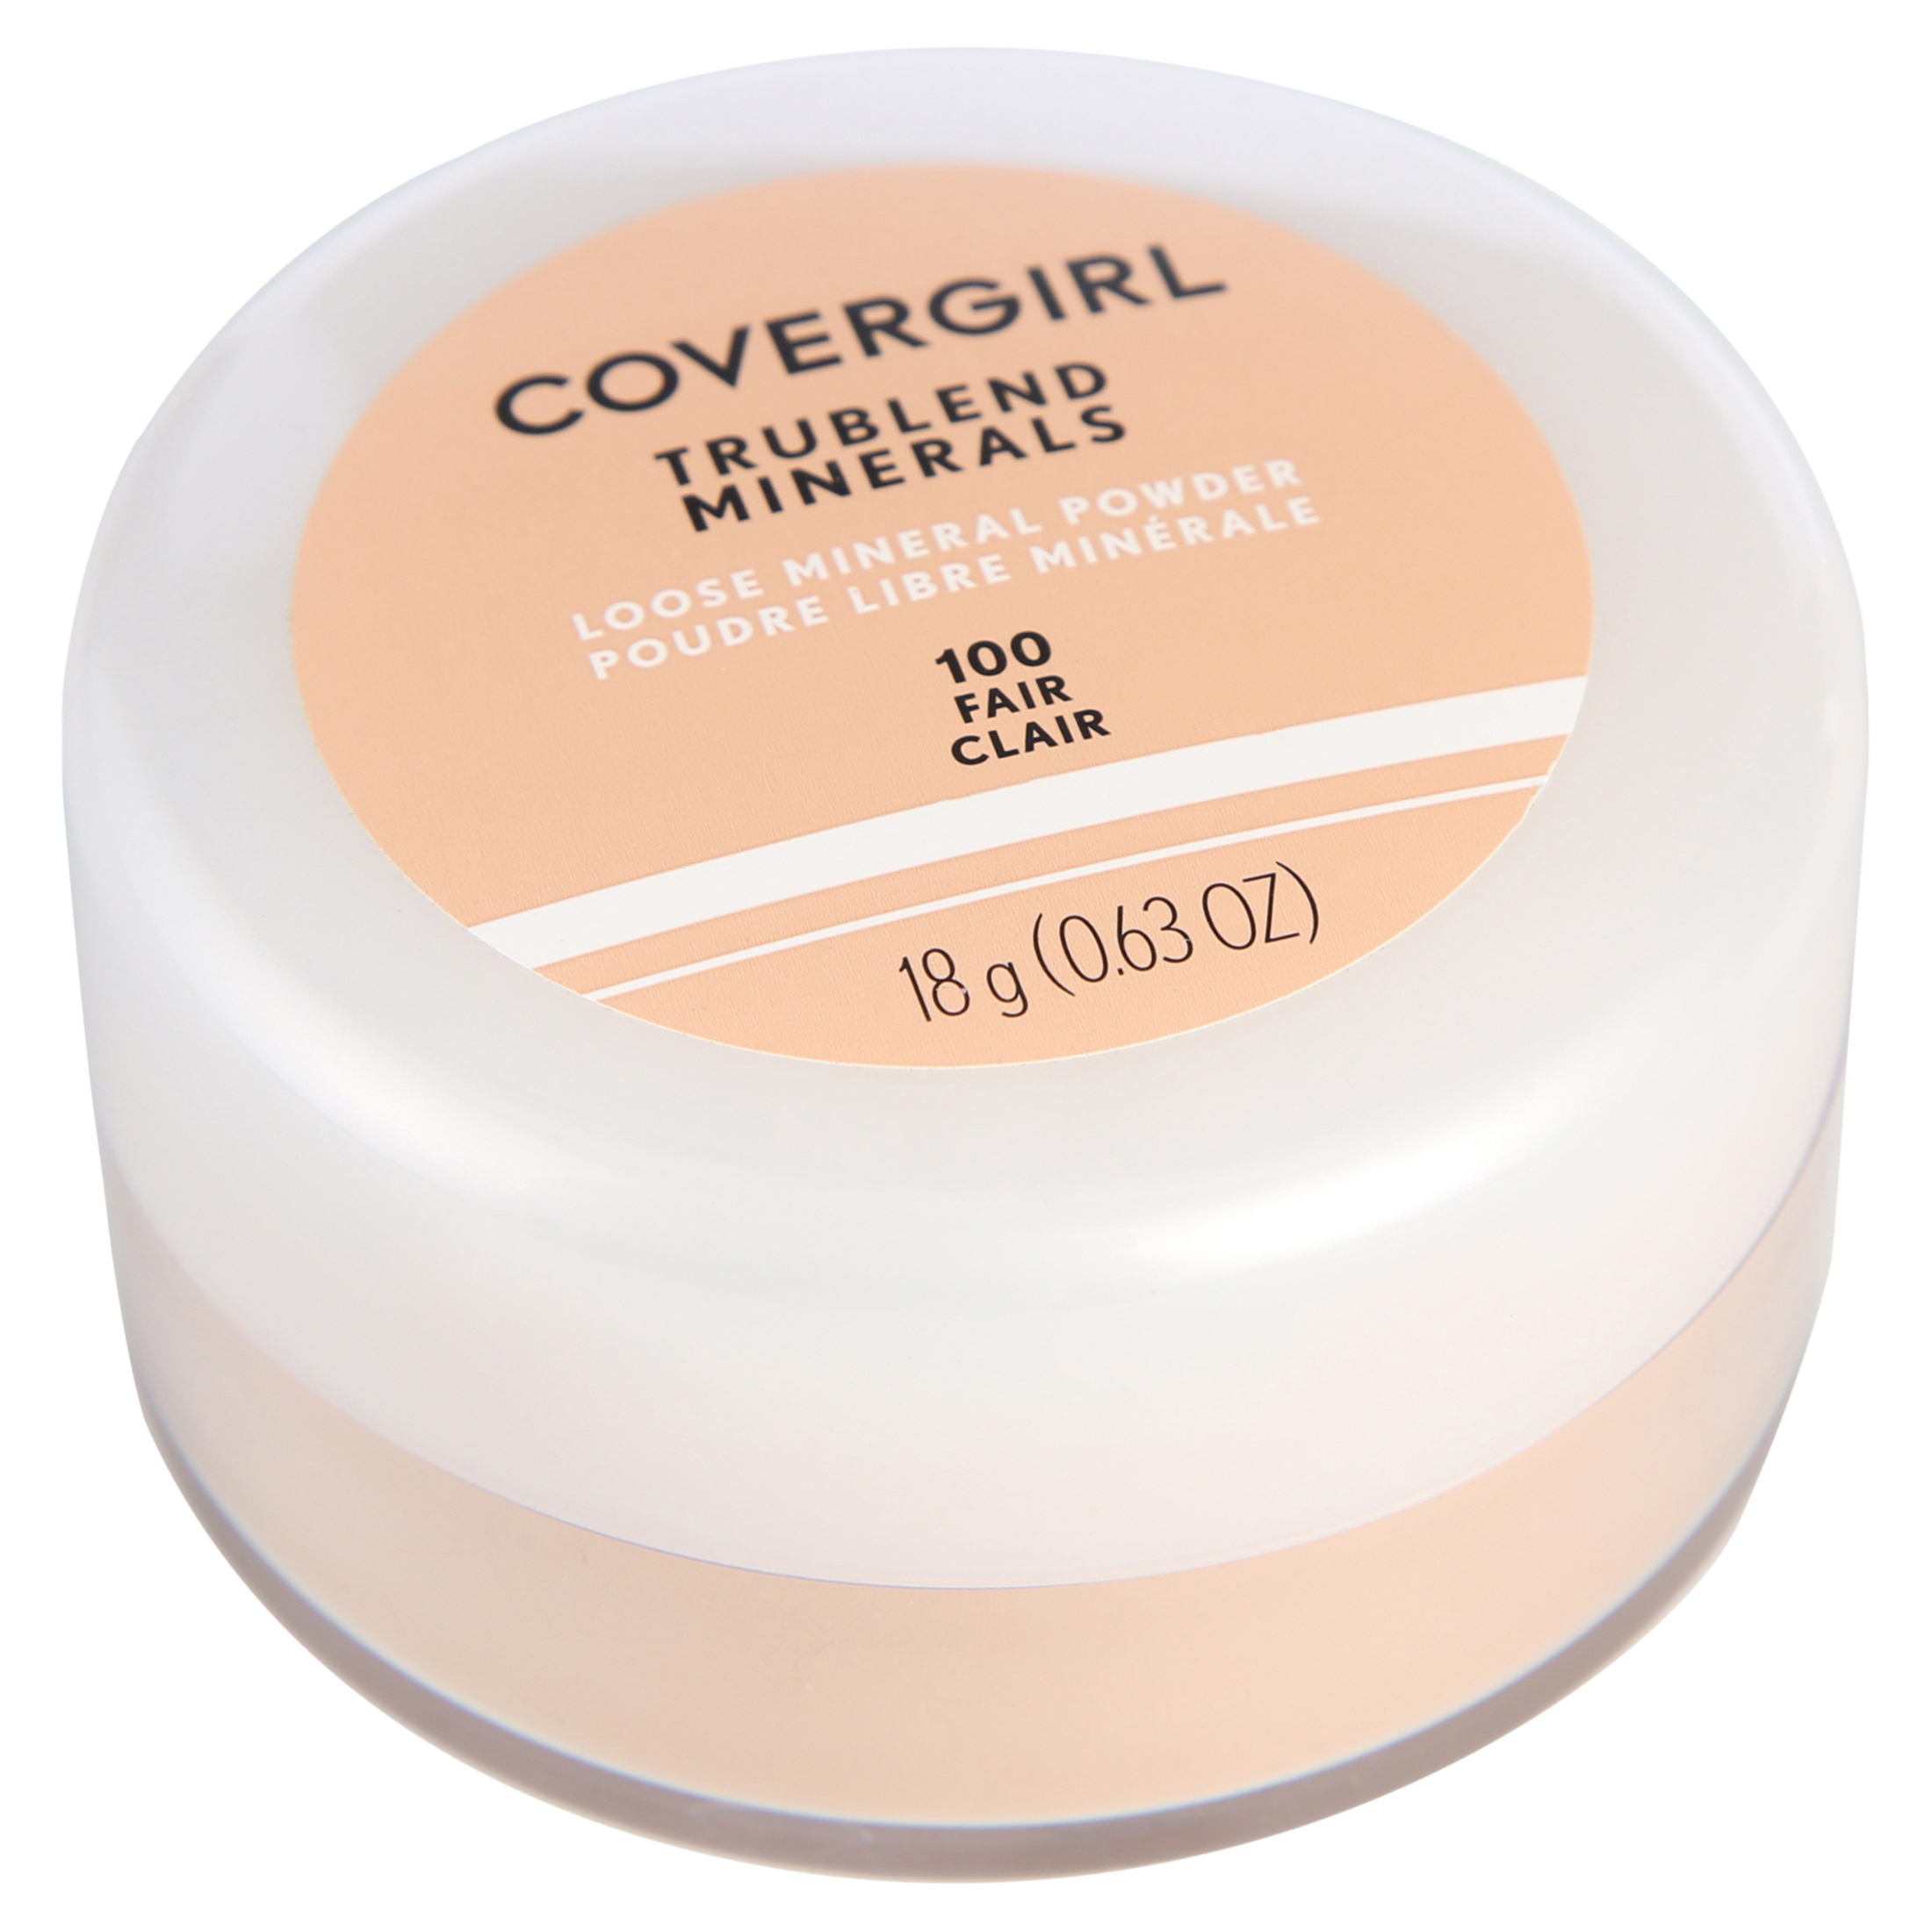 COVERGIRL TruBlend Loose Mineral Powder, 100 Fair, 0.63 oz, Setting Powder, Loose Powder, Enriched with Minerals, Easy Application, Soft, Even-Toned, Fresh Complextion - image 3 of 7